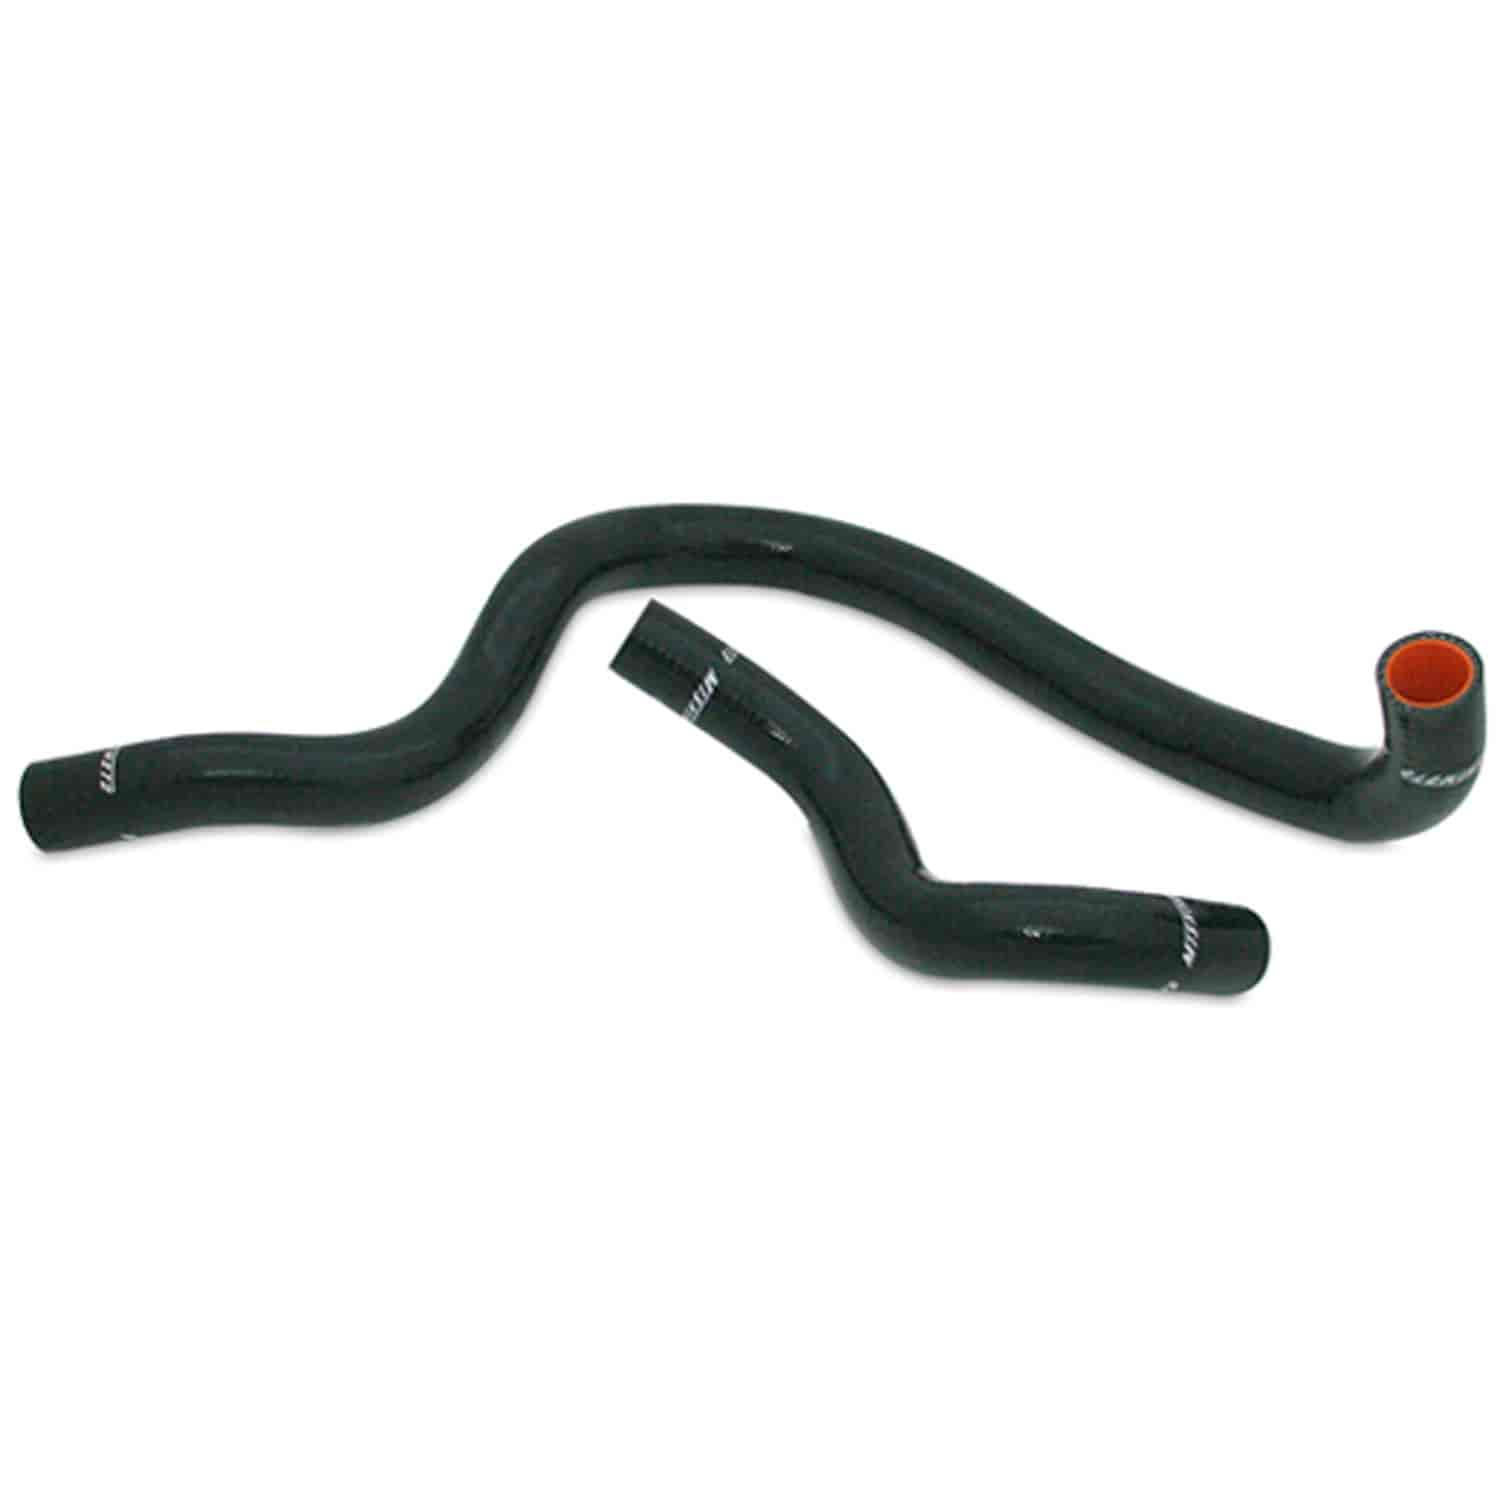 Silicone Radiator Hose Kit.This kit will fit both